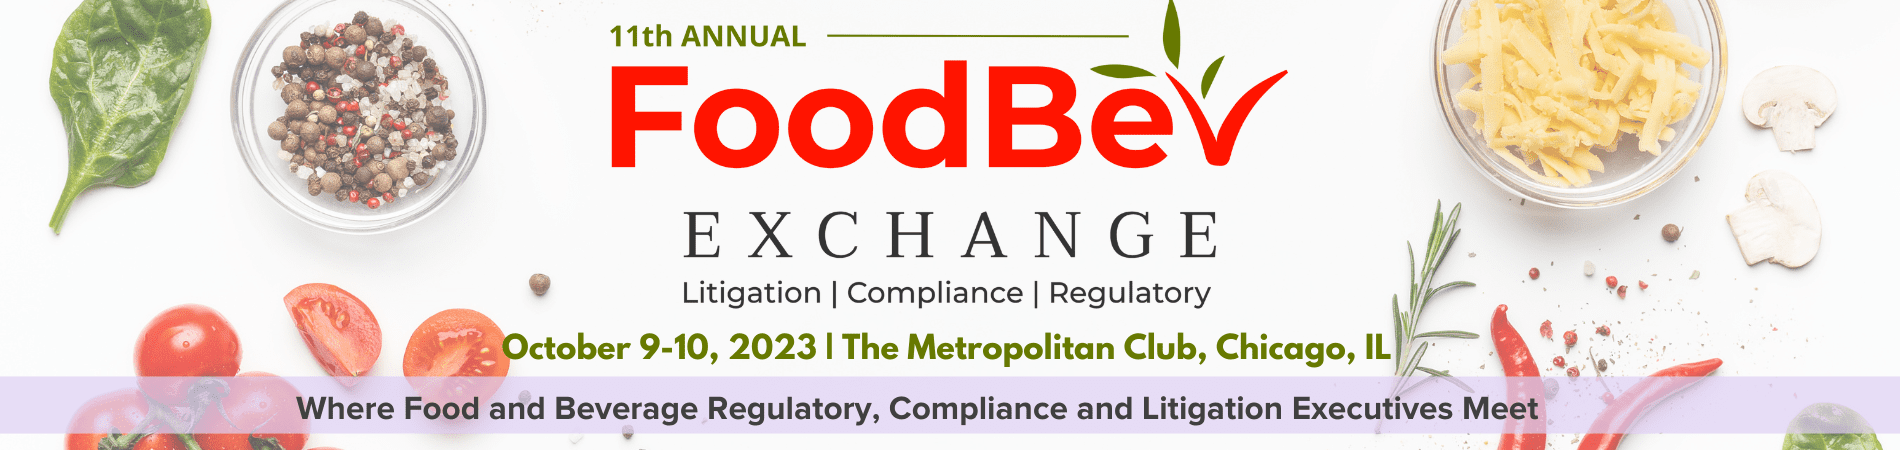 11th Year Anniversary FoodBev Exchange Litigation, Compliance, Regulatory, October 9-10, 2023, The Metropolitan Club, Chicago, Il., Where Food and Beverage Regulatory, Compliance and Litigation Executives Meet